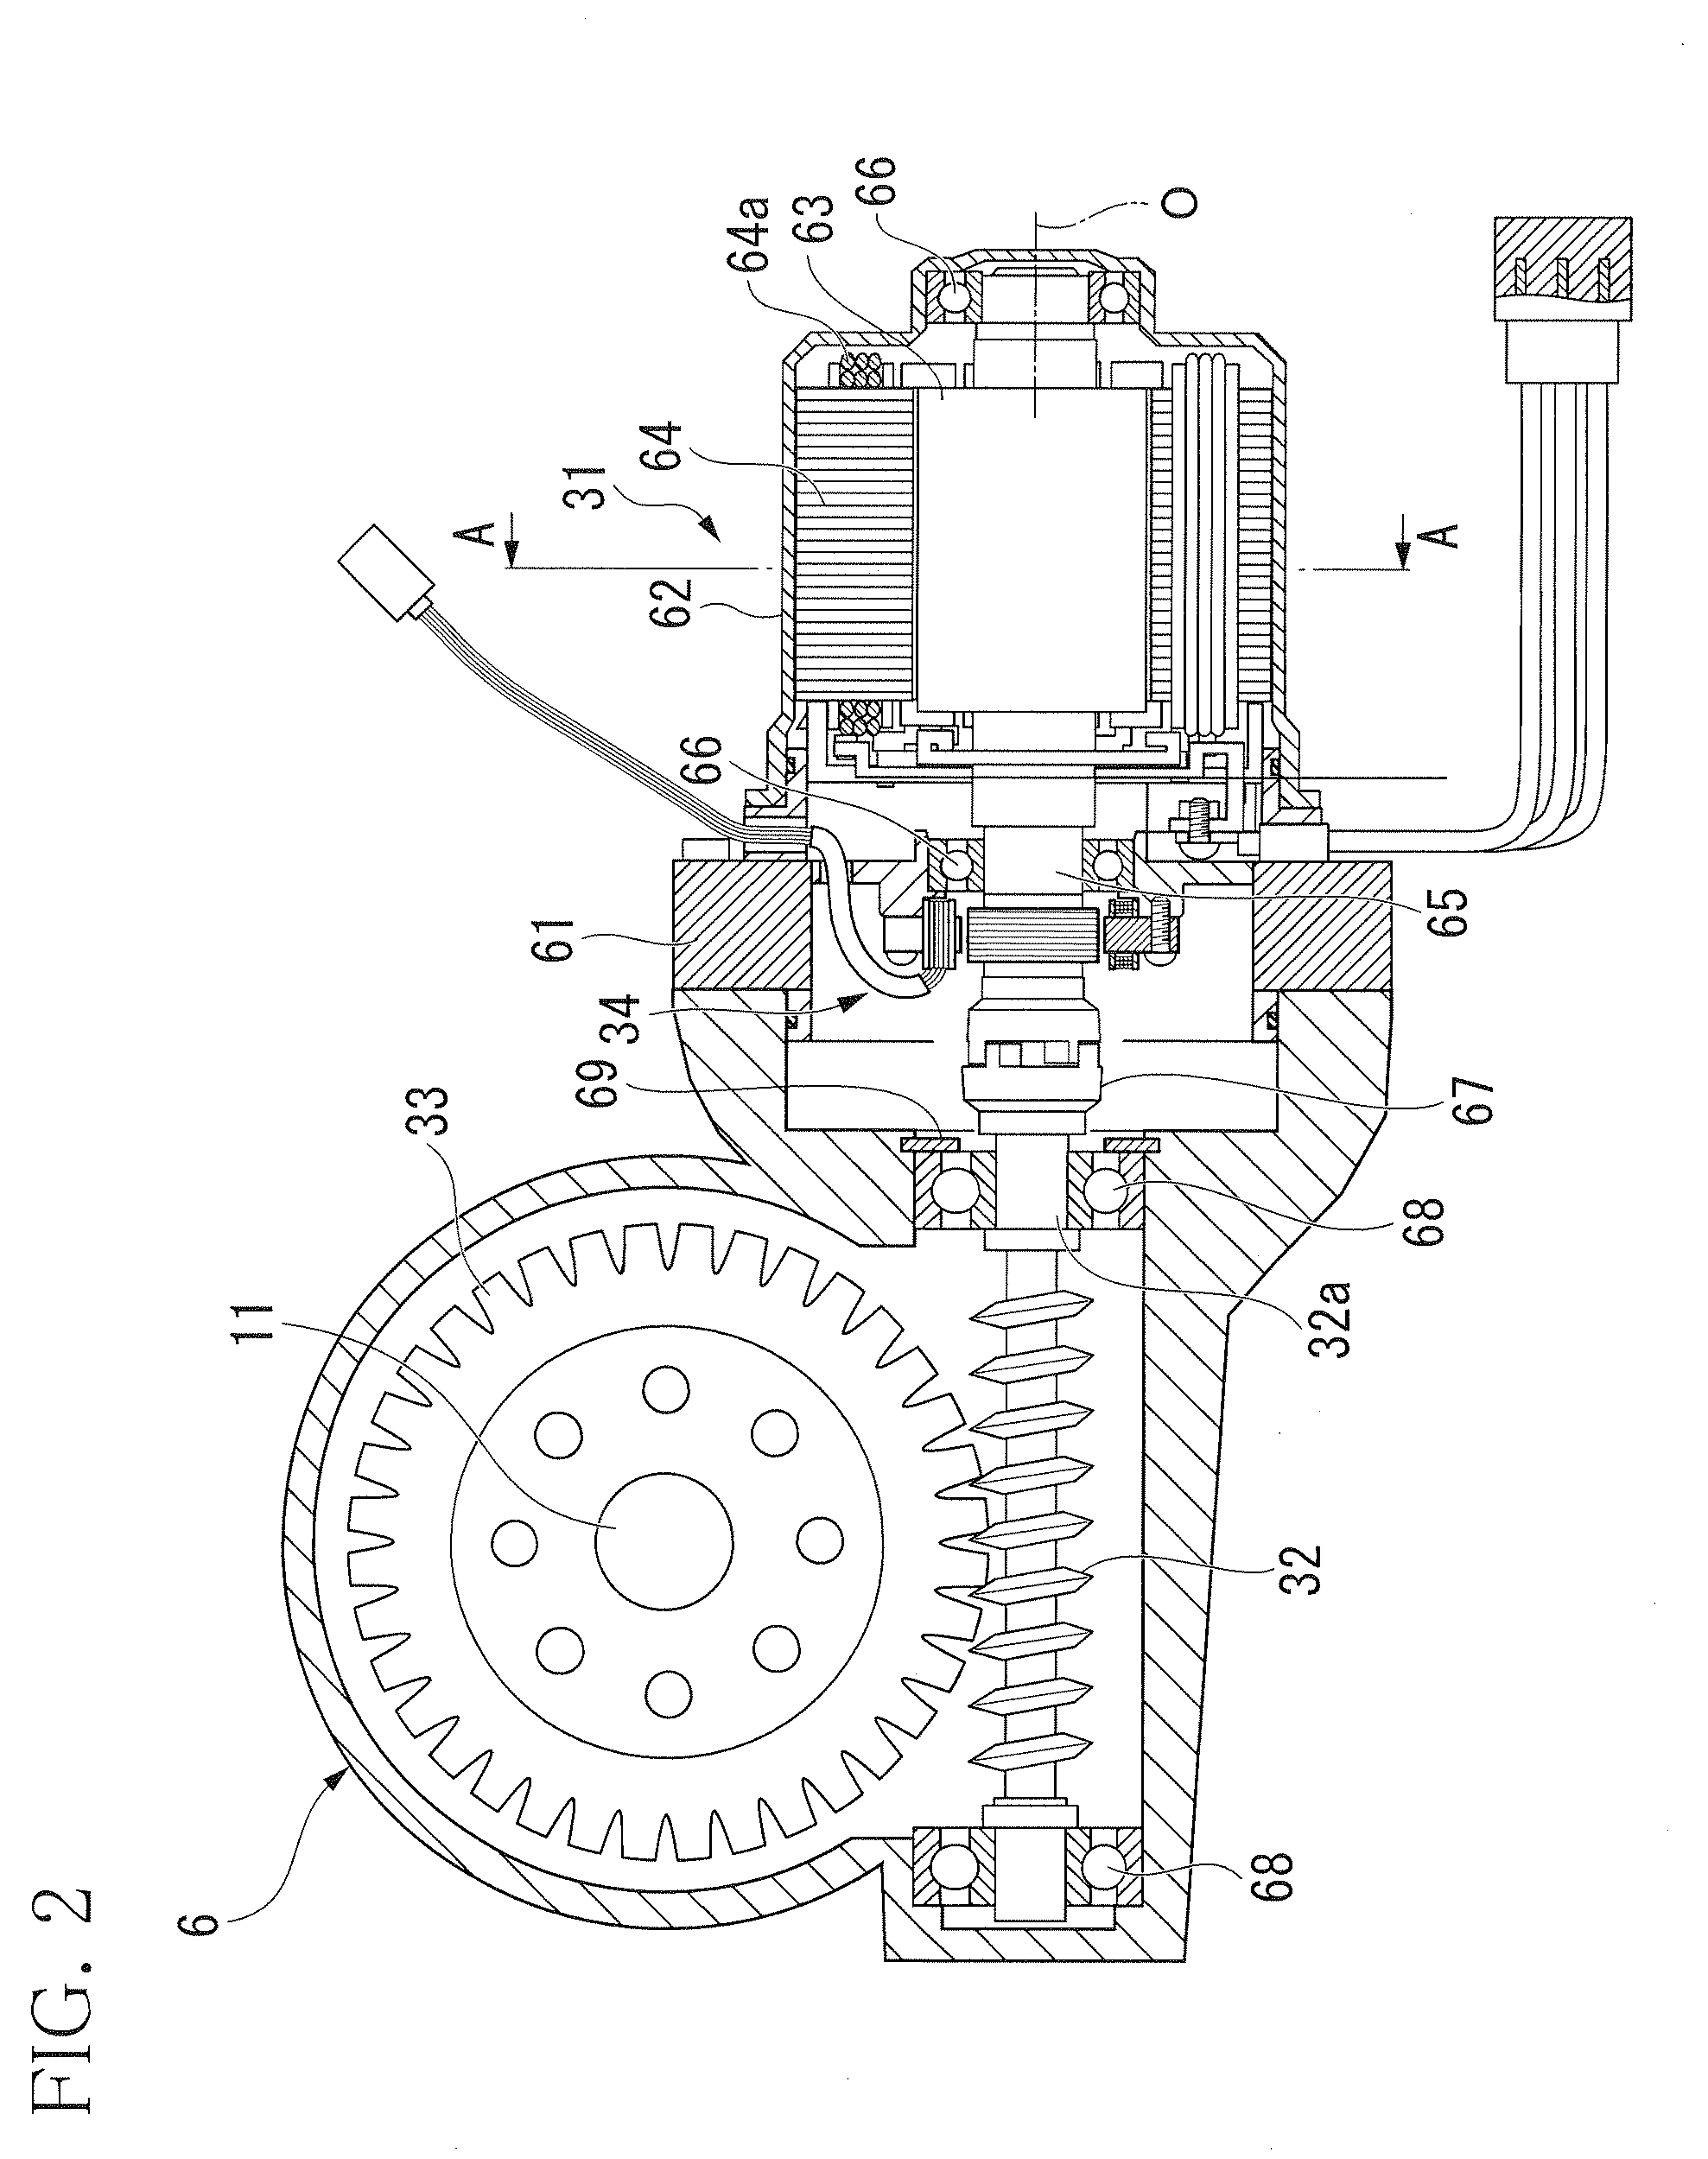 Motor control device and electric steering system